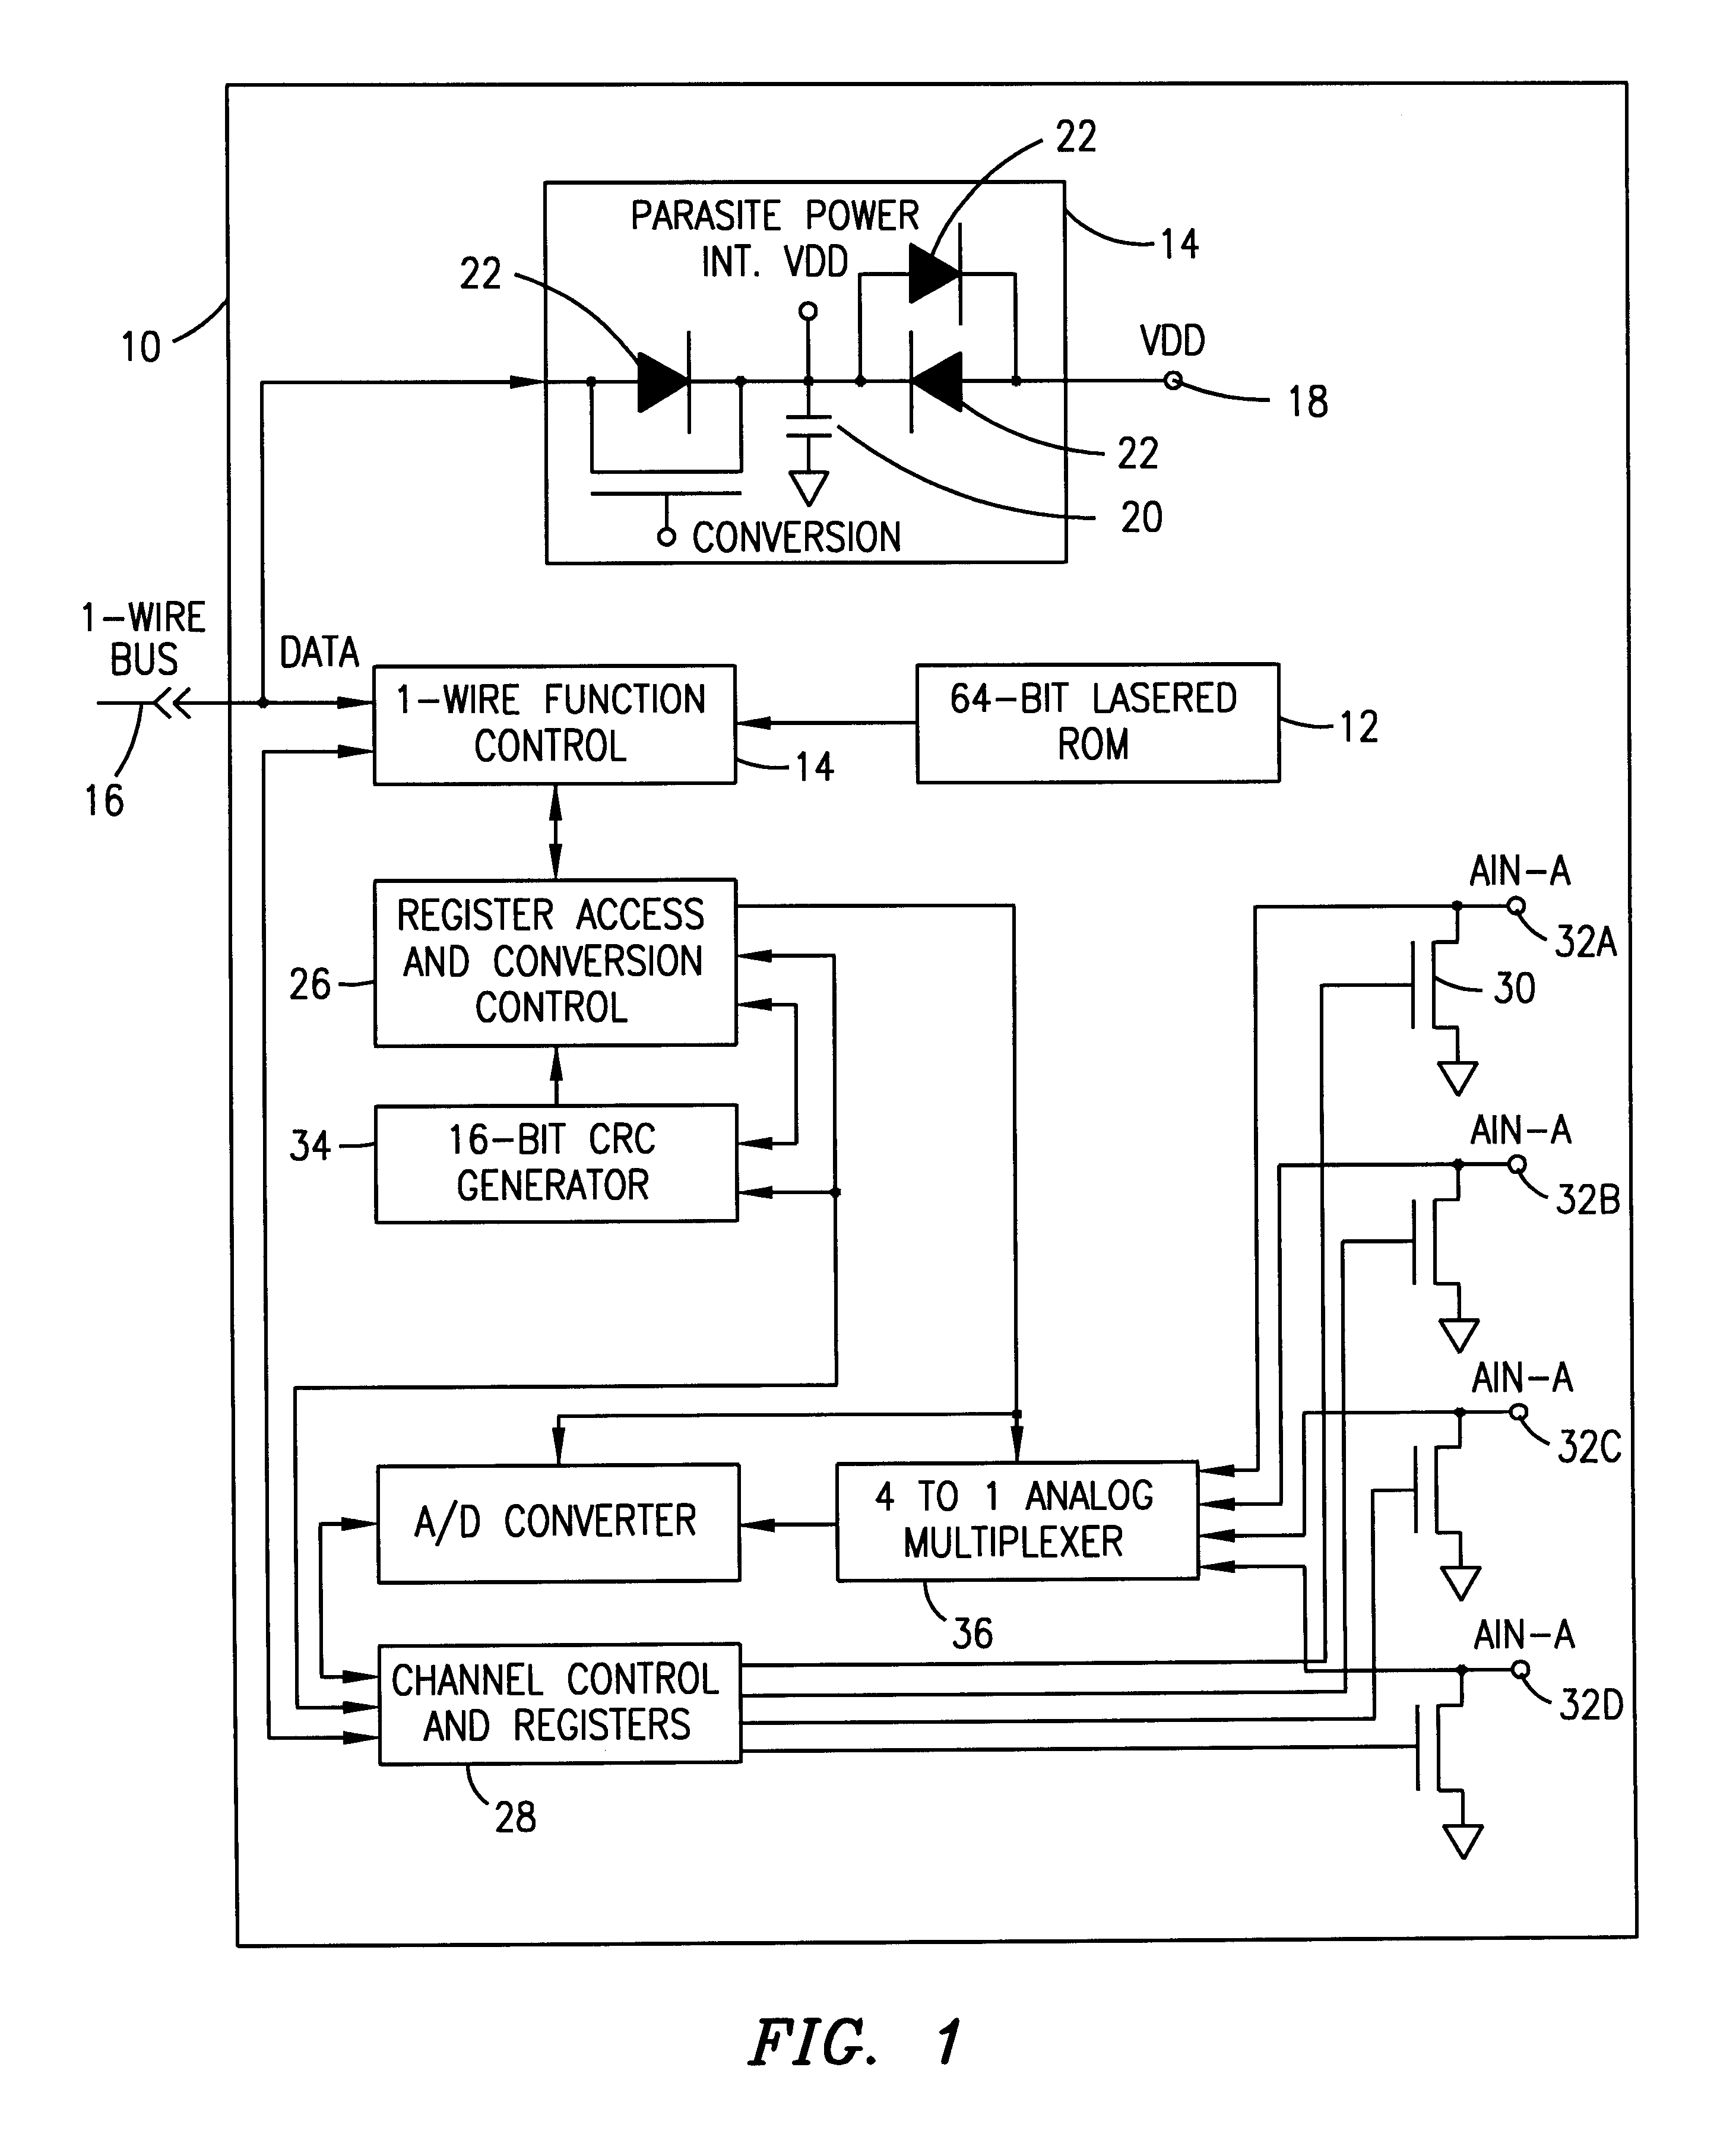 One-wire device with A-to-D converter